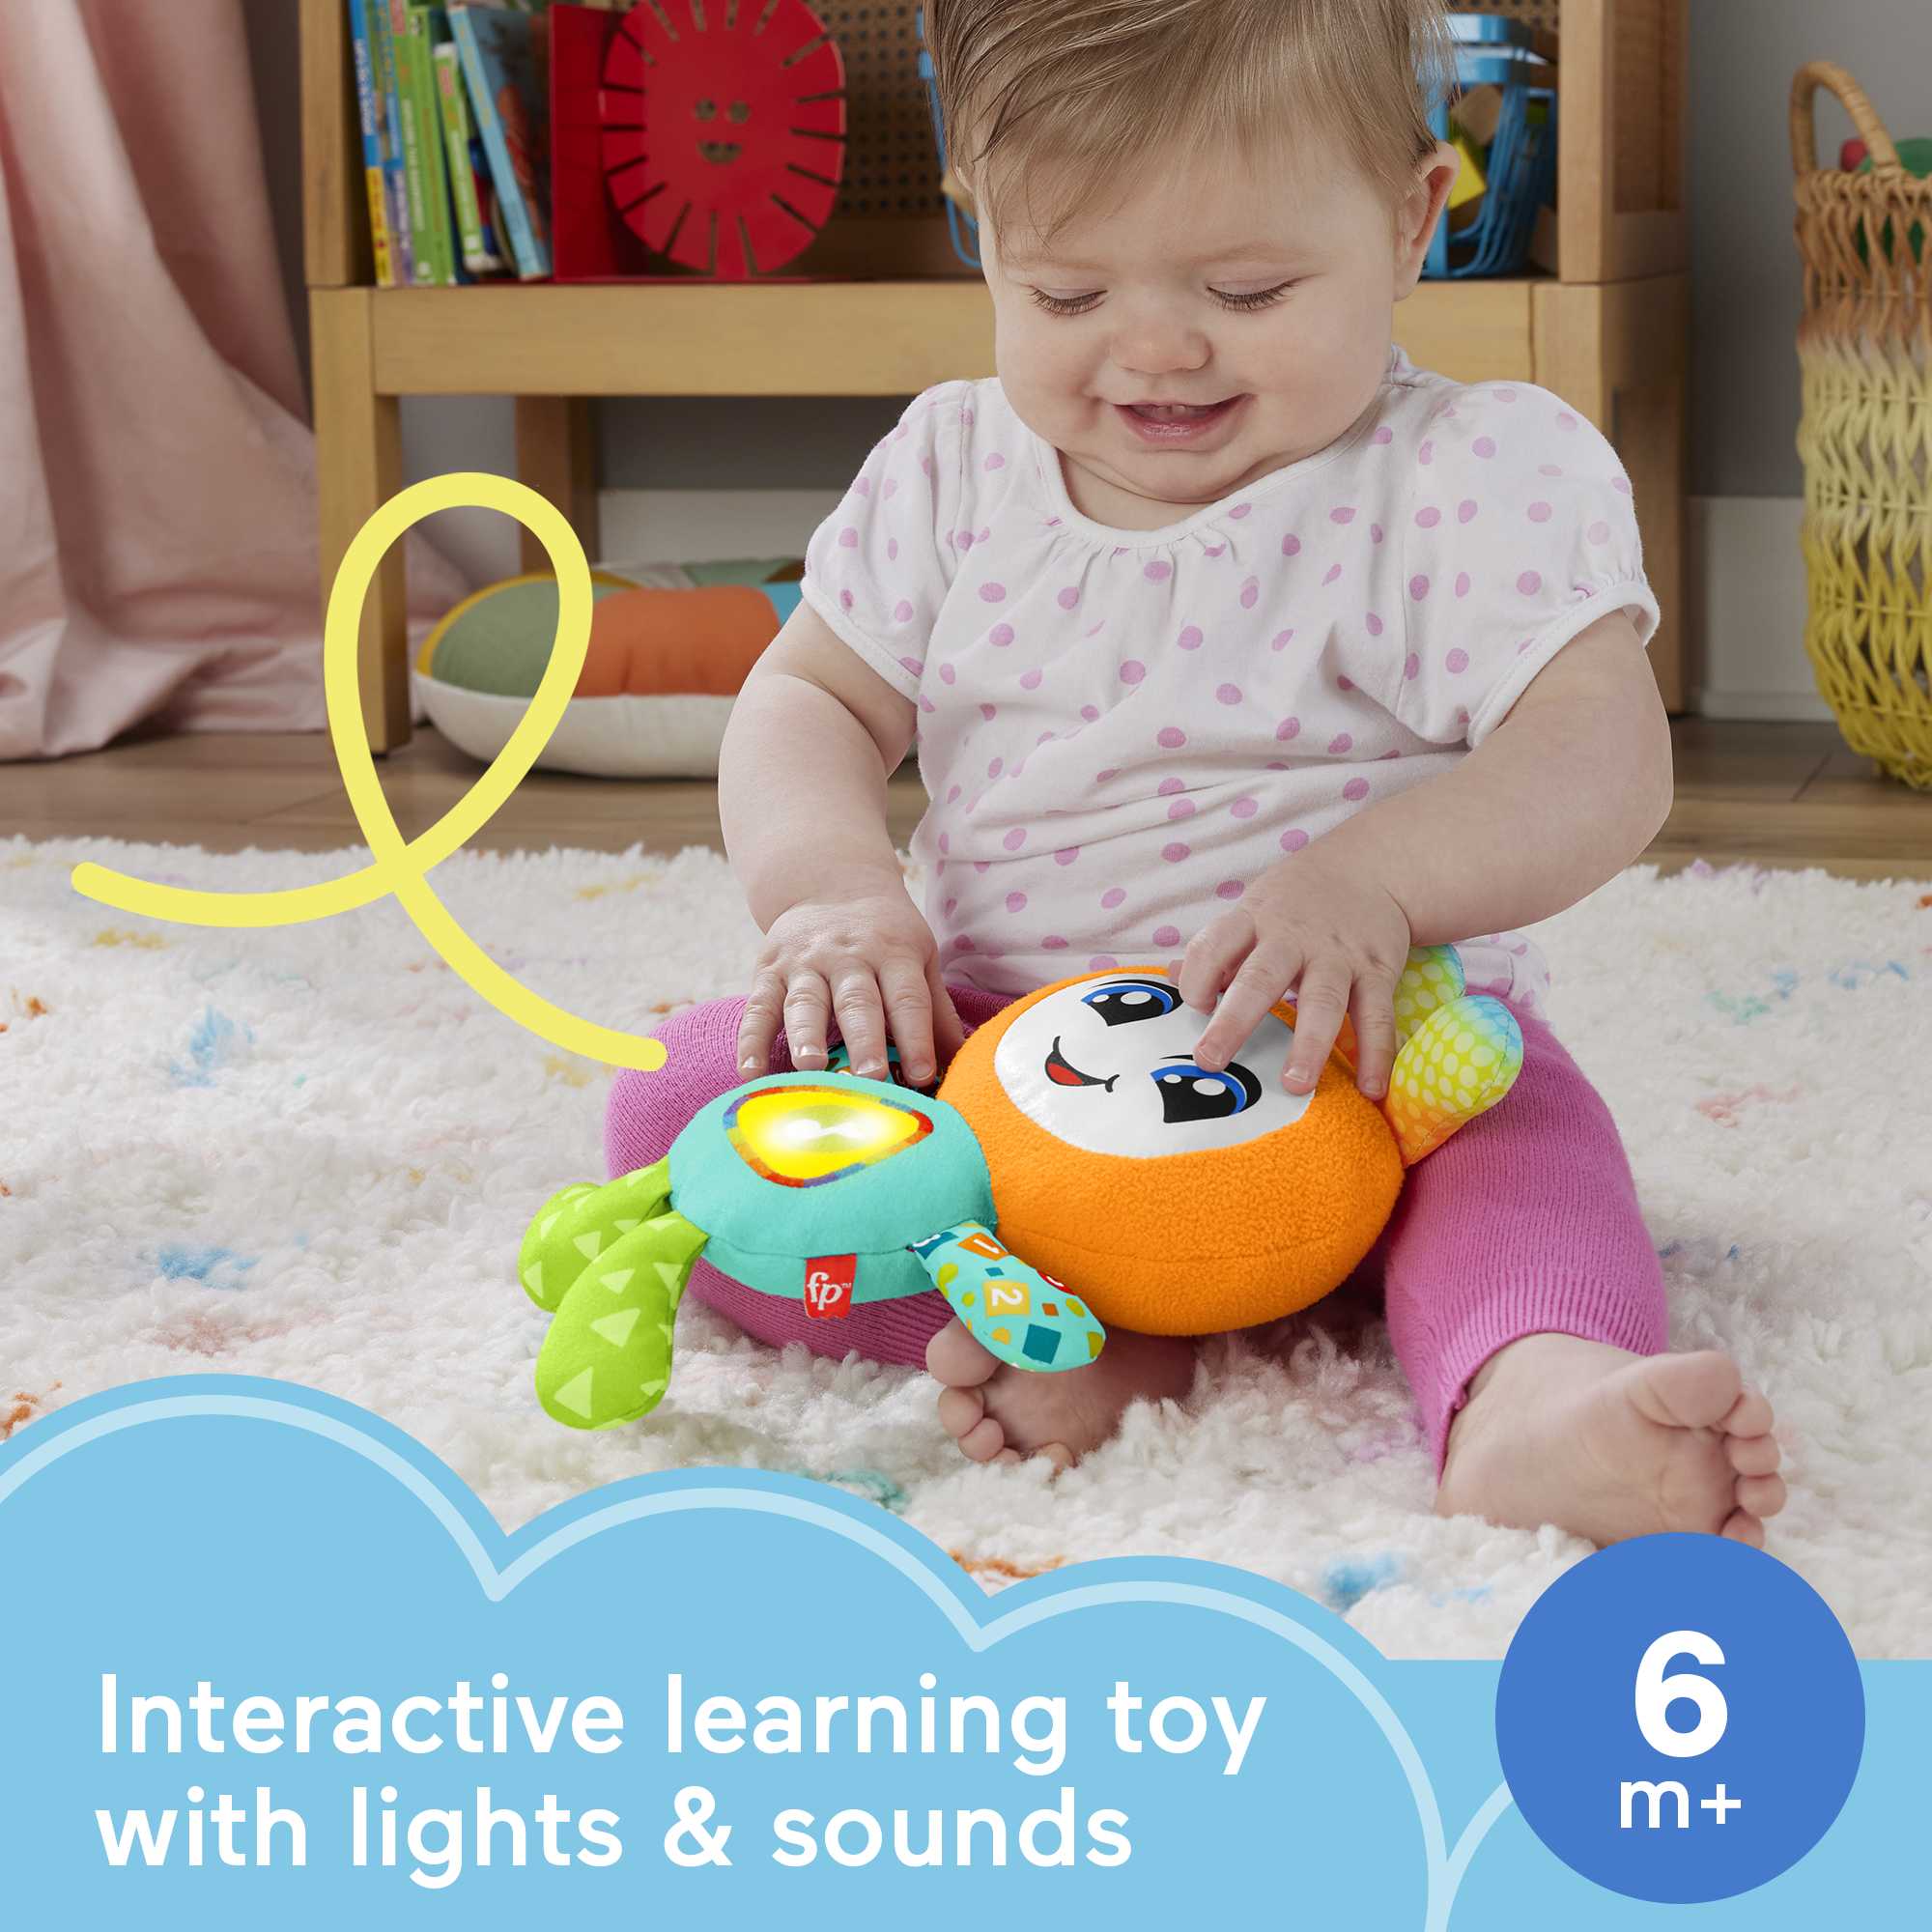 Fisher-Price Baby Toddler & Preschool Toy 4-In-1 Learning Bot With Music  Lights & Smart Stages Content For Ages 6+ Months